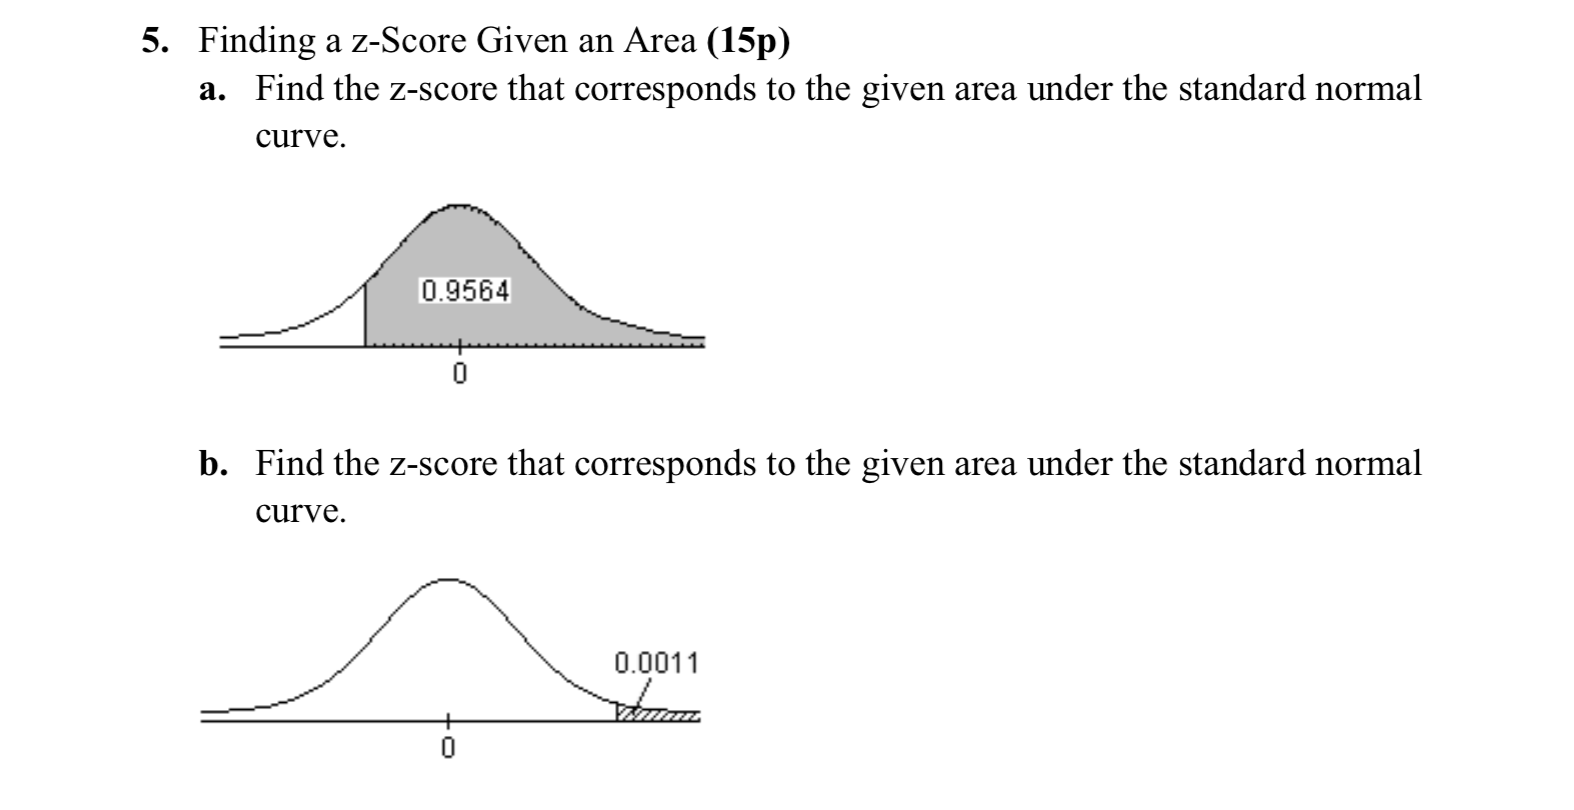 Solved 30. Finding a z-Score Given an Area (130p) a. Find the